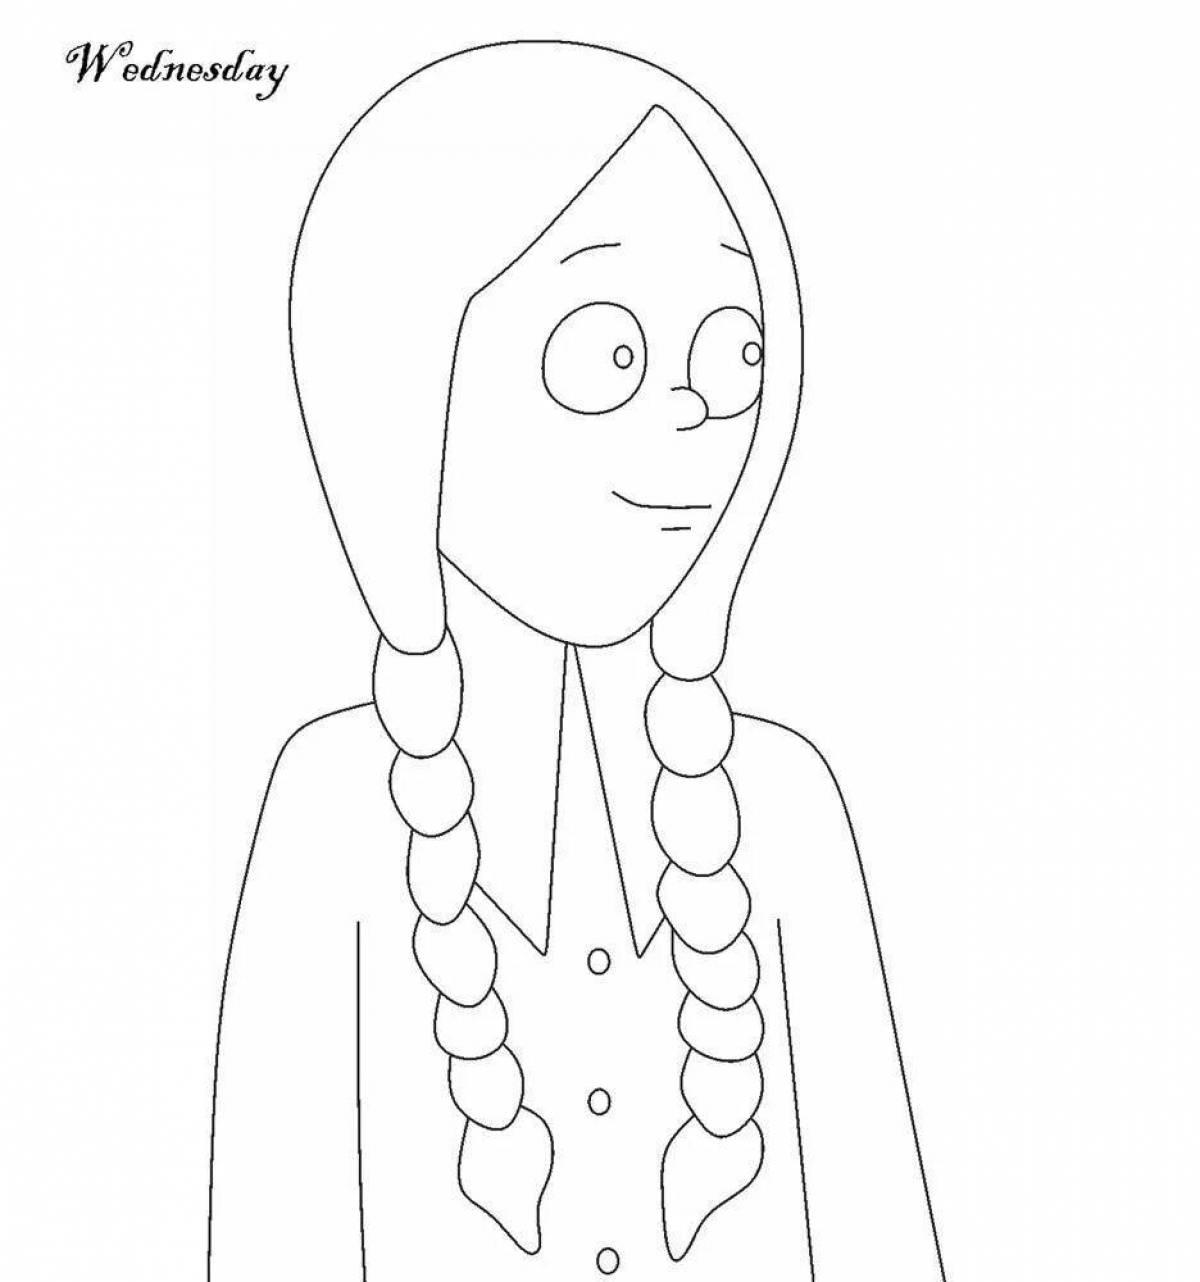 Vivacious wenday coloring page